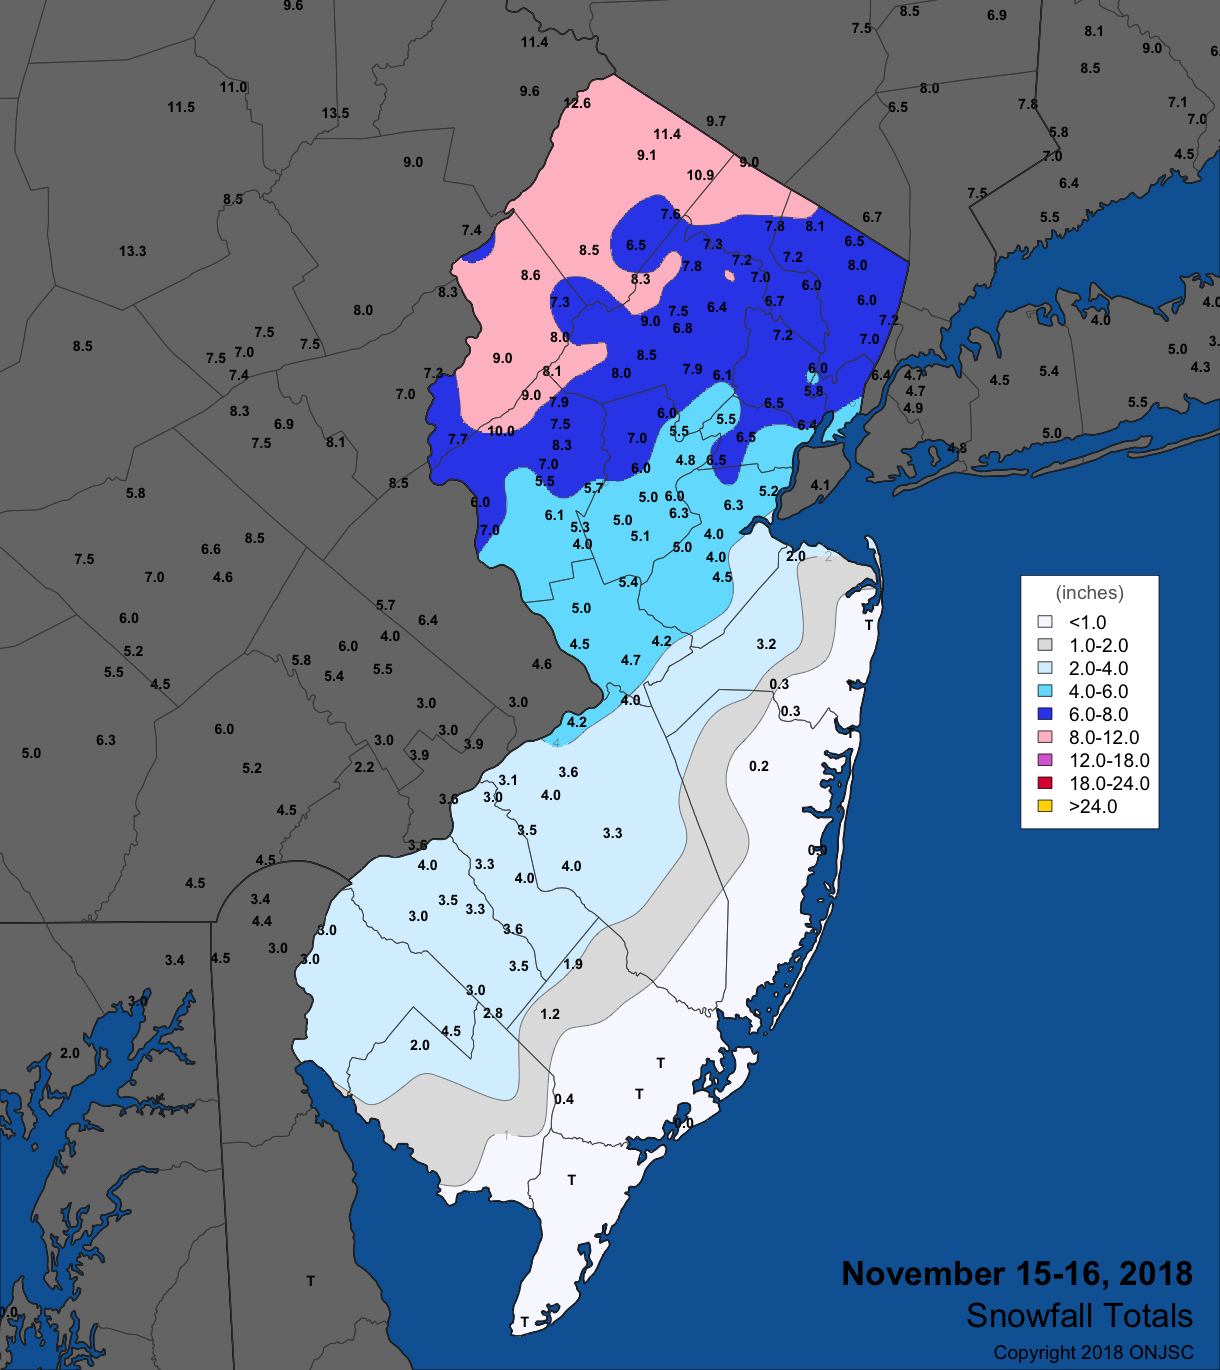 Snowfall map for November 15th-16th event